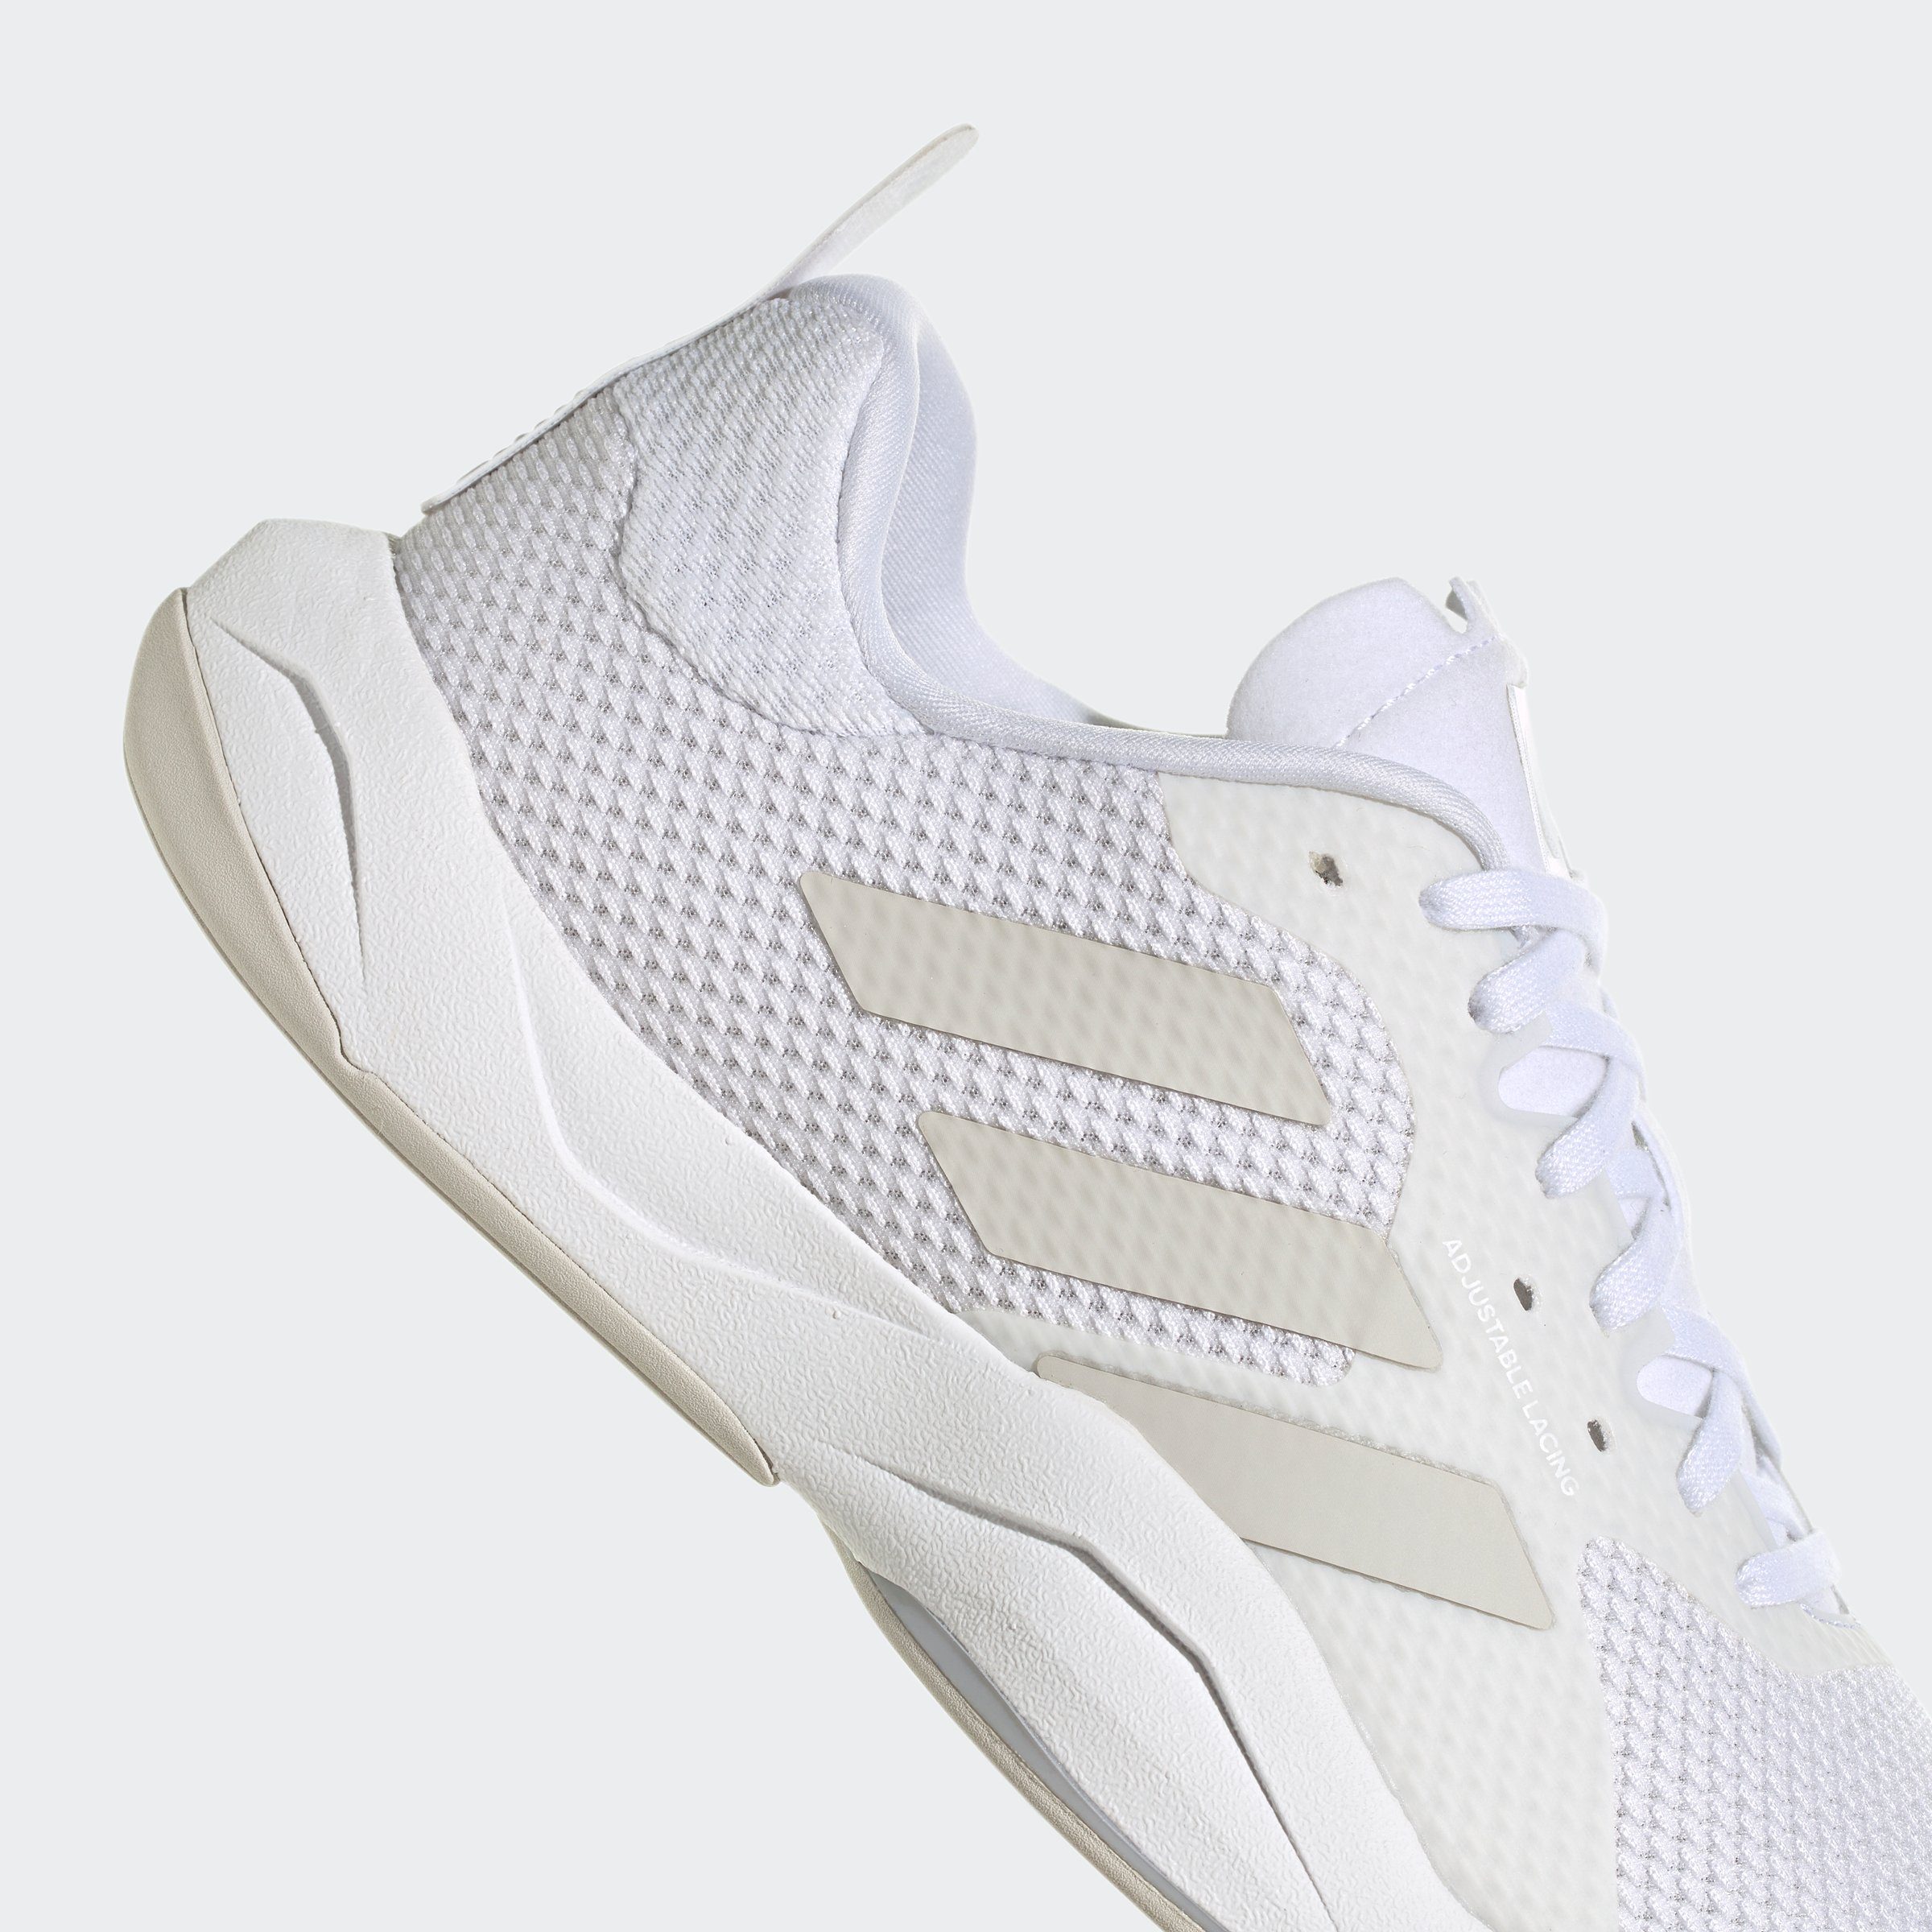 Cloud Grey RAPIDMOVE TRAININGSSCHUH Grey / / White Fitnessschuh Performance One Two adidas